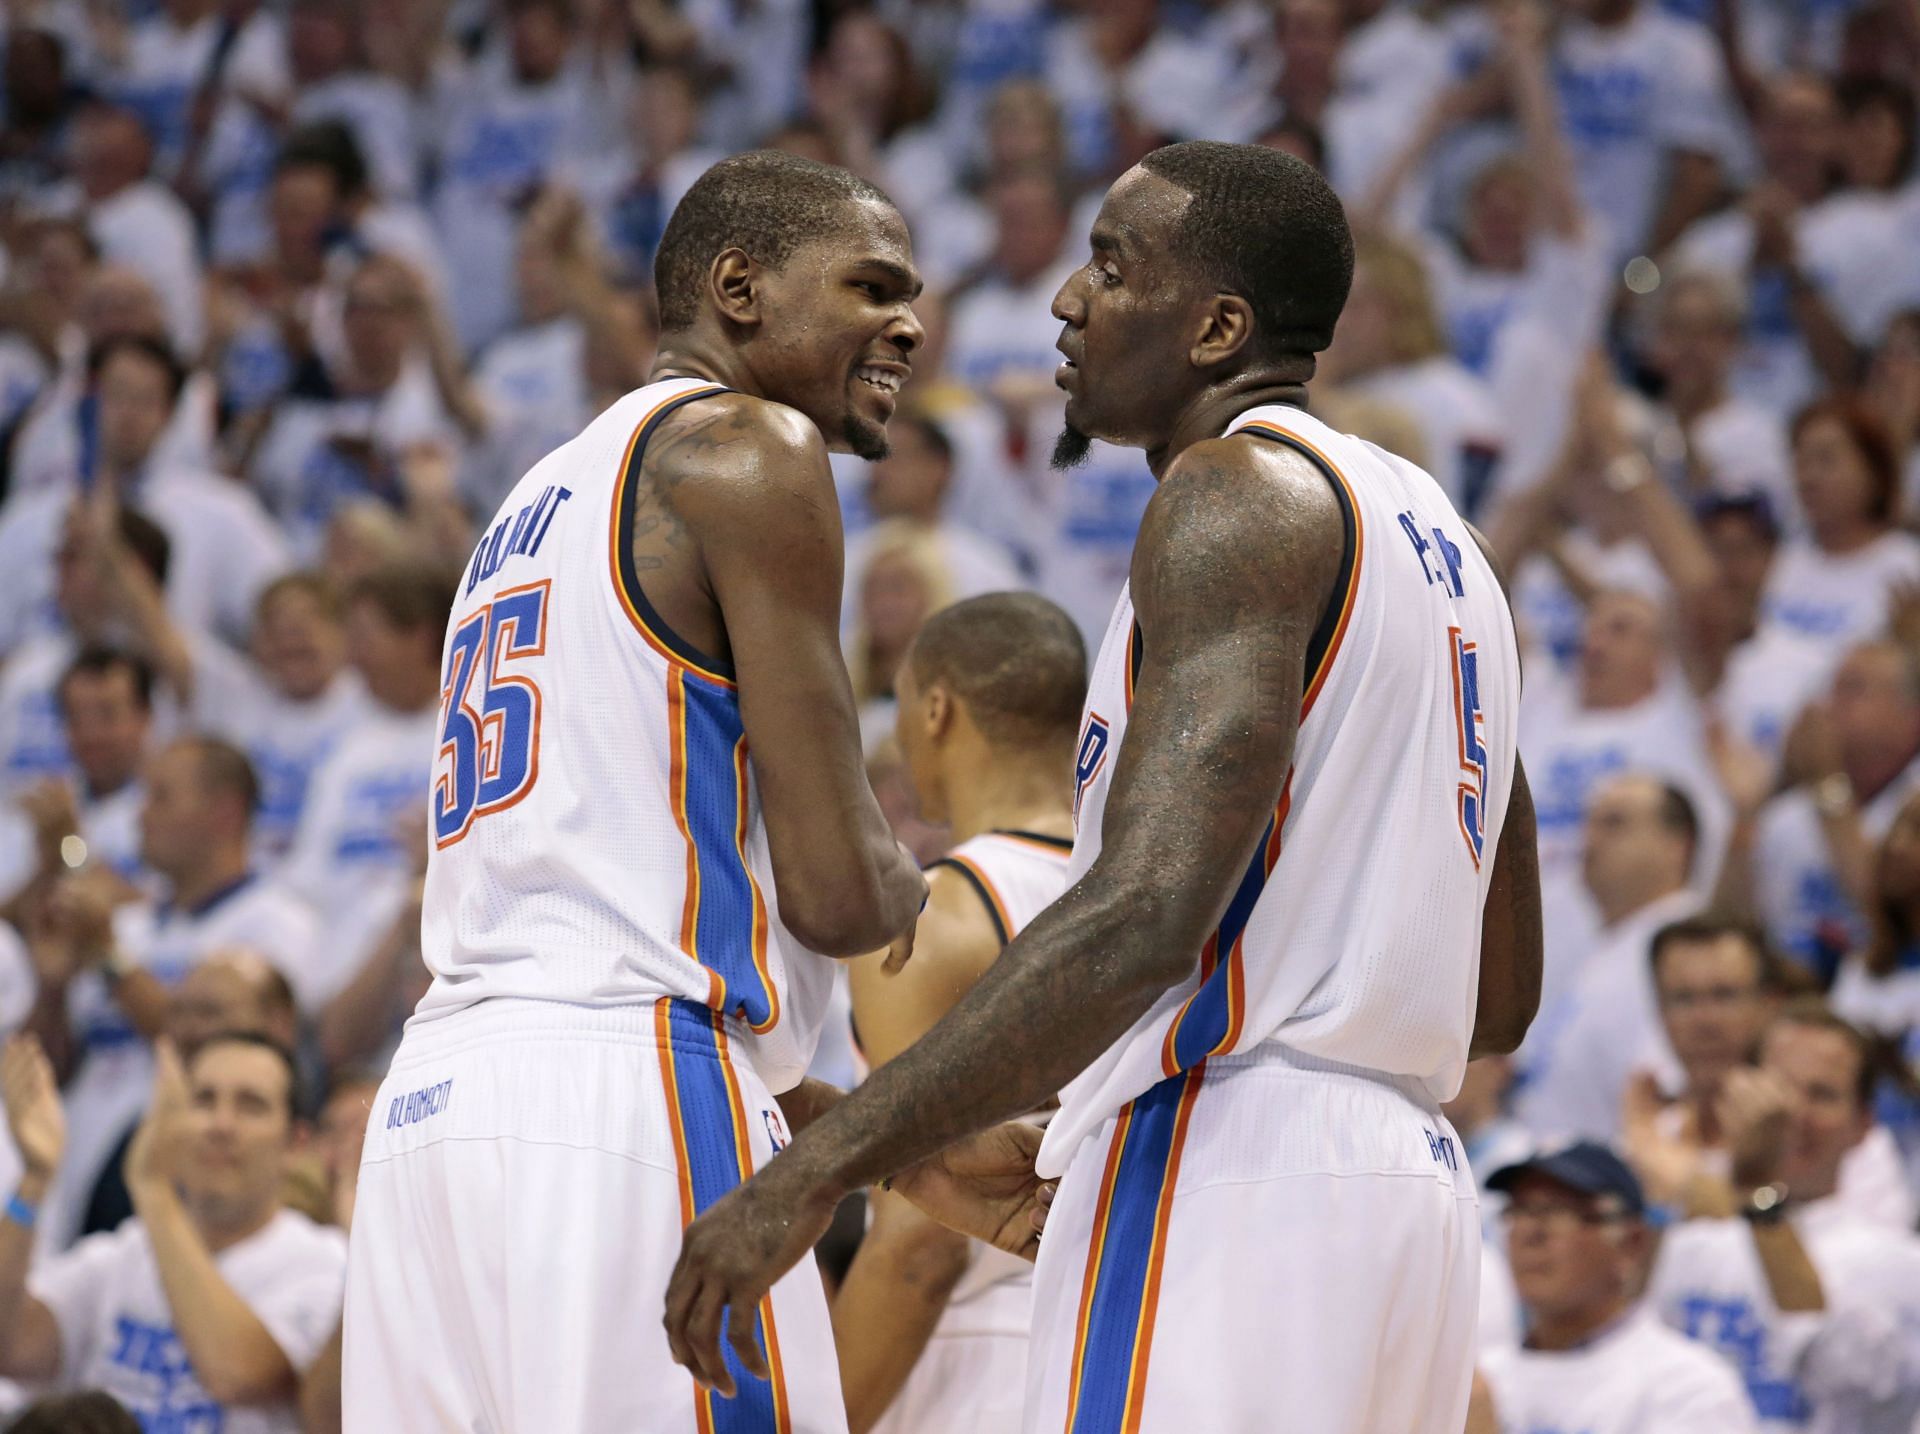 Kevin Durant (left) and Kendrick Perkins (right) in 2012